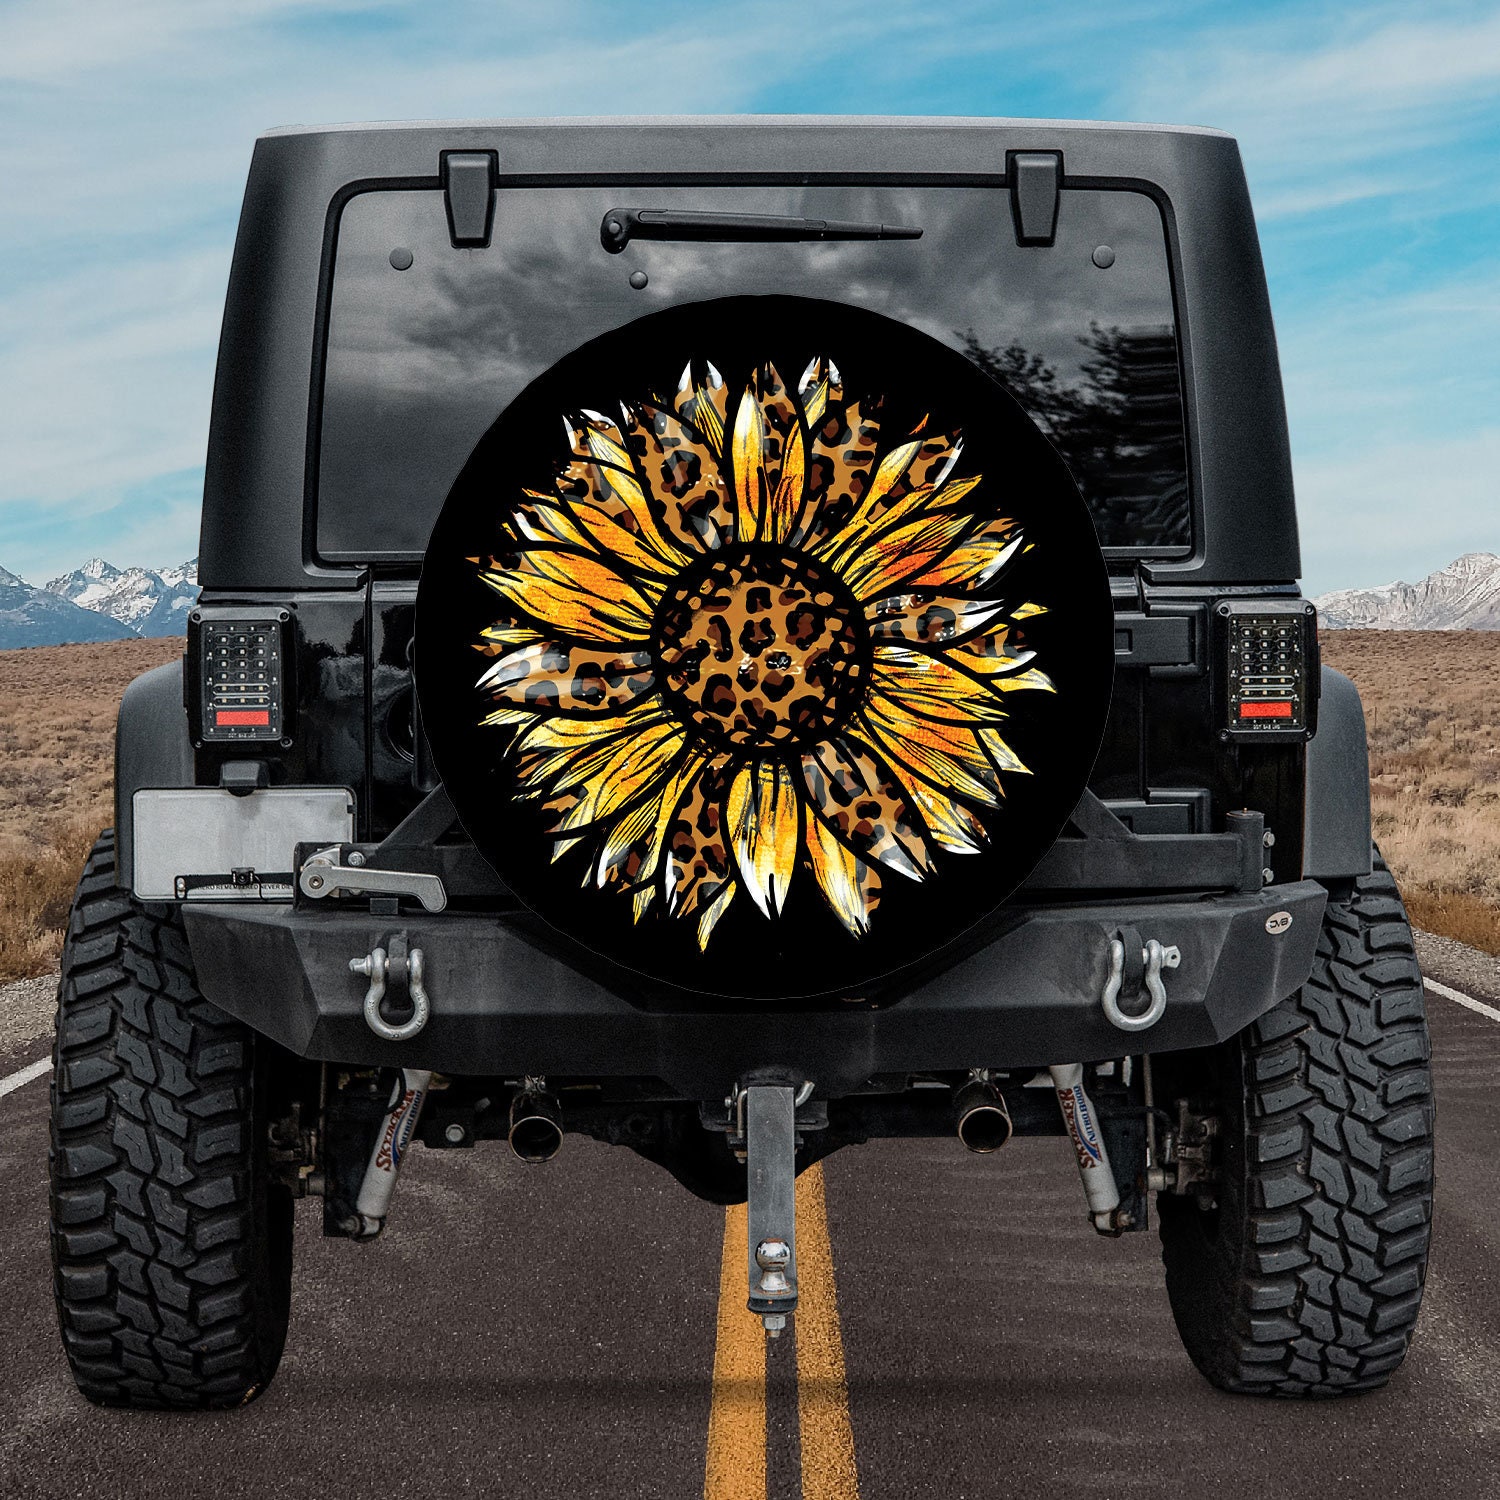 Sunflower Spare Tire Cover, Western Leopard Sunflower Spare Tire Cover With or Without Camera Hole